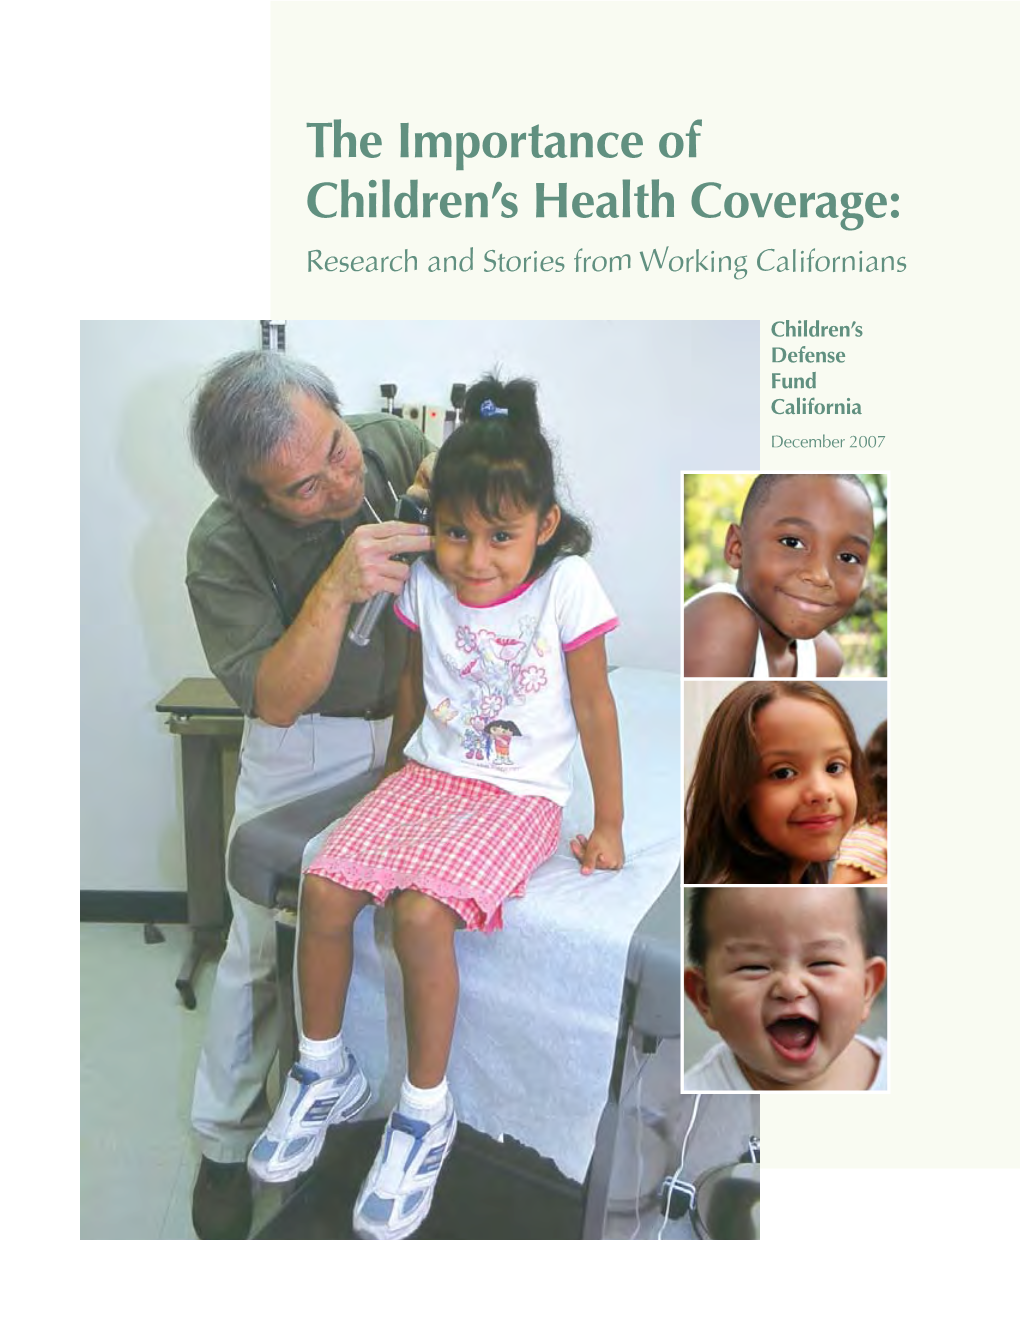 The Importance of Children's Health Coverage: Research and Stories from Working Californians